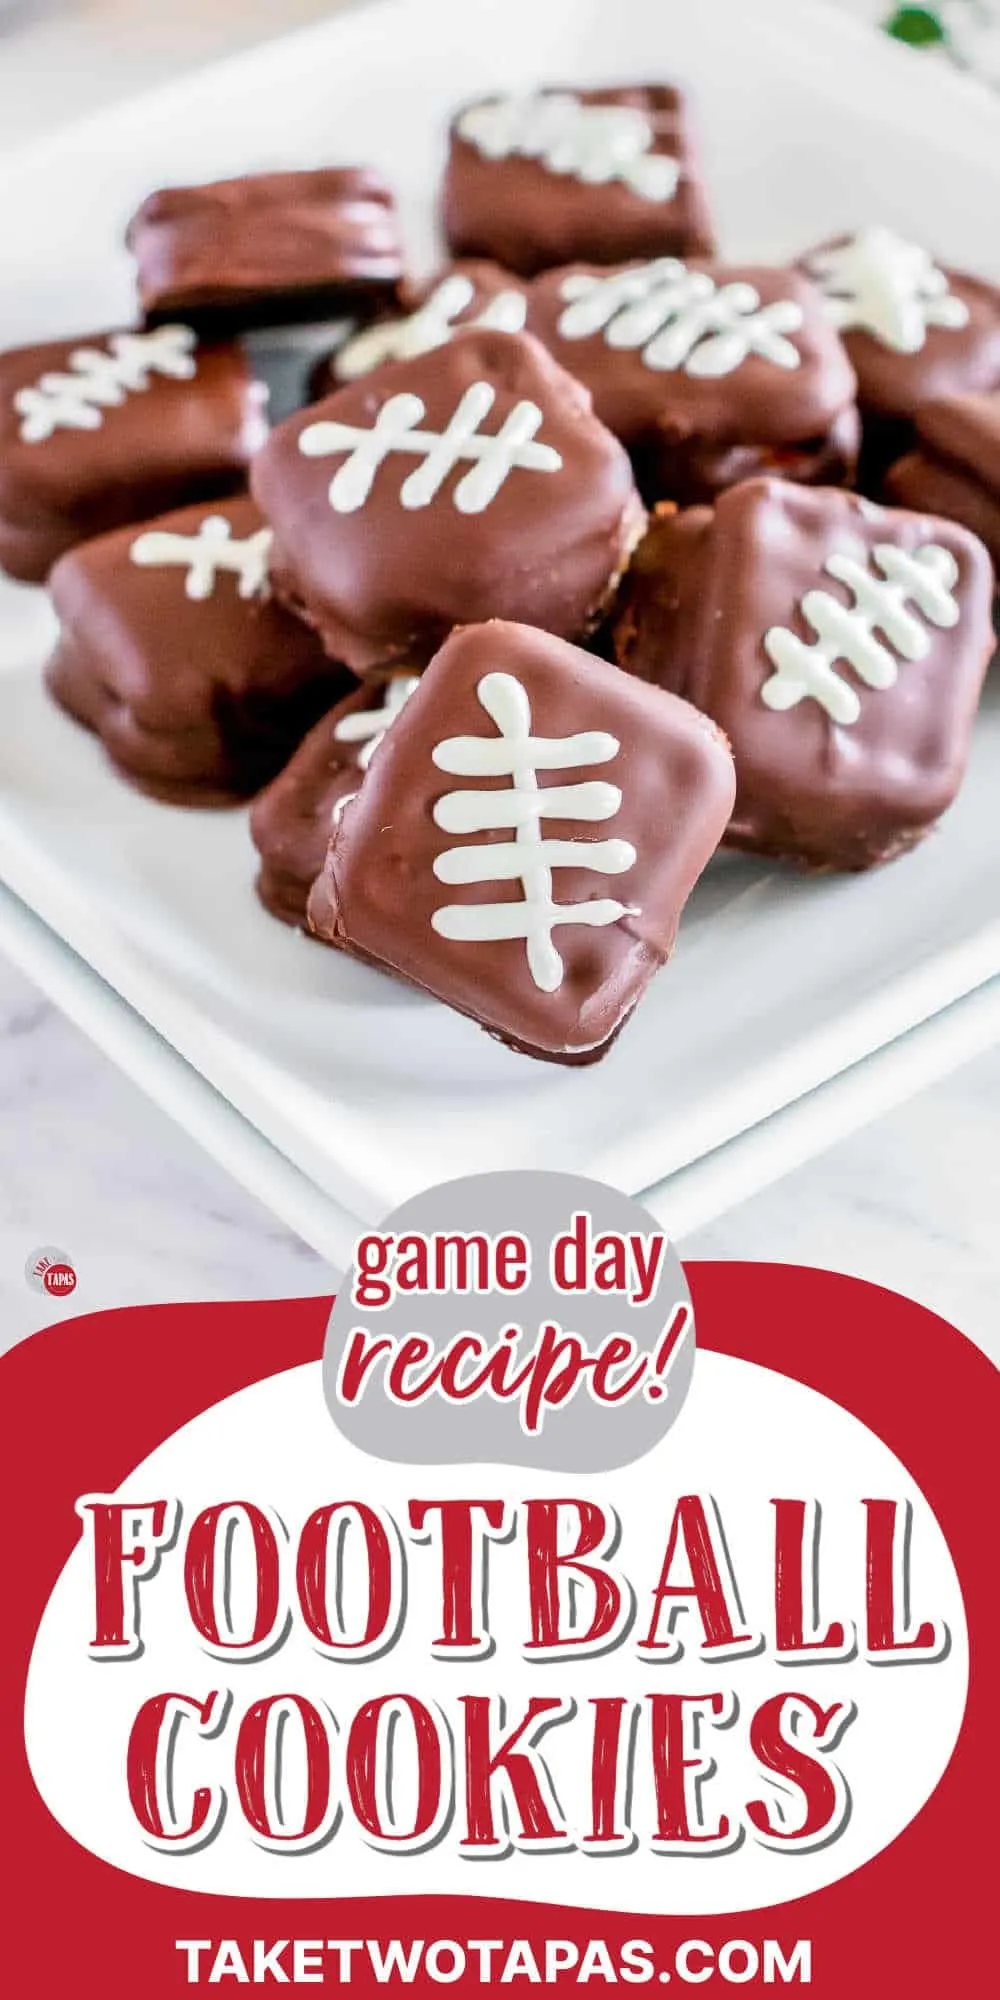 large picture of football cookies on a white plate with red text